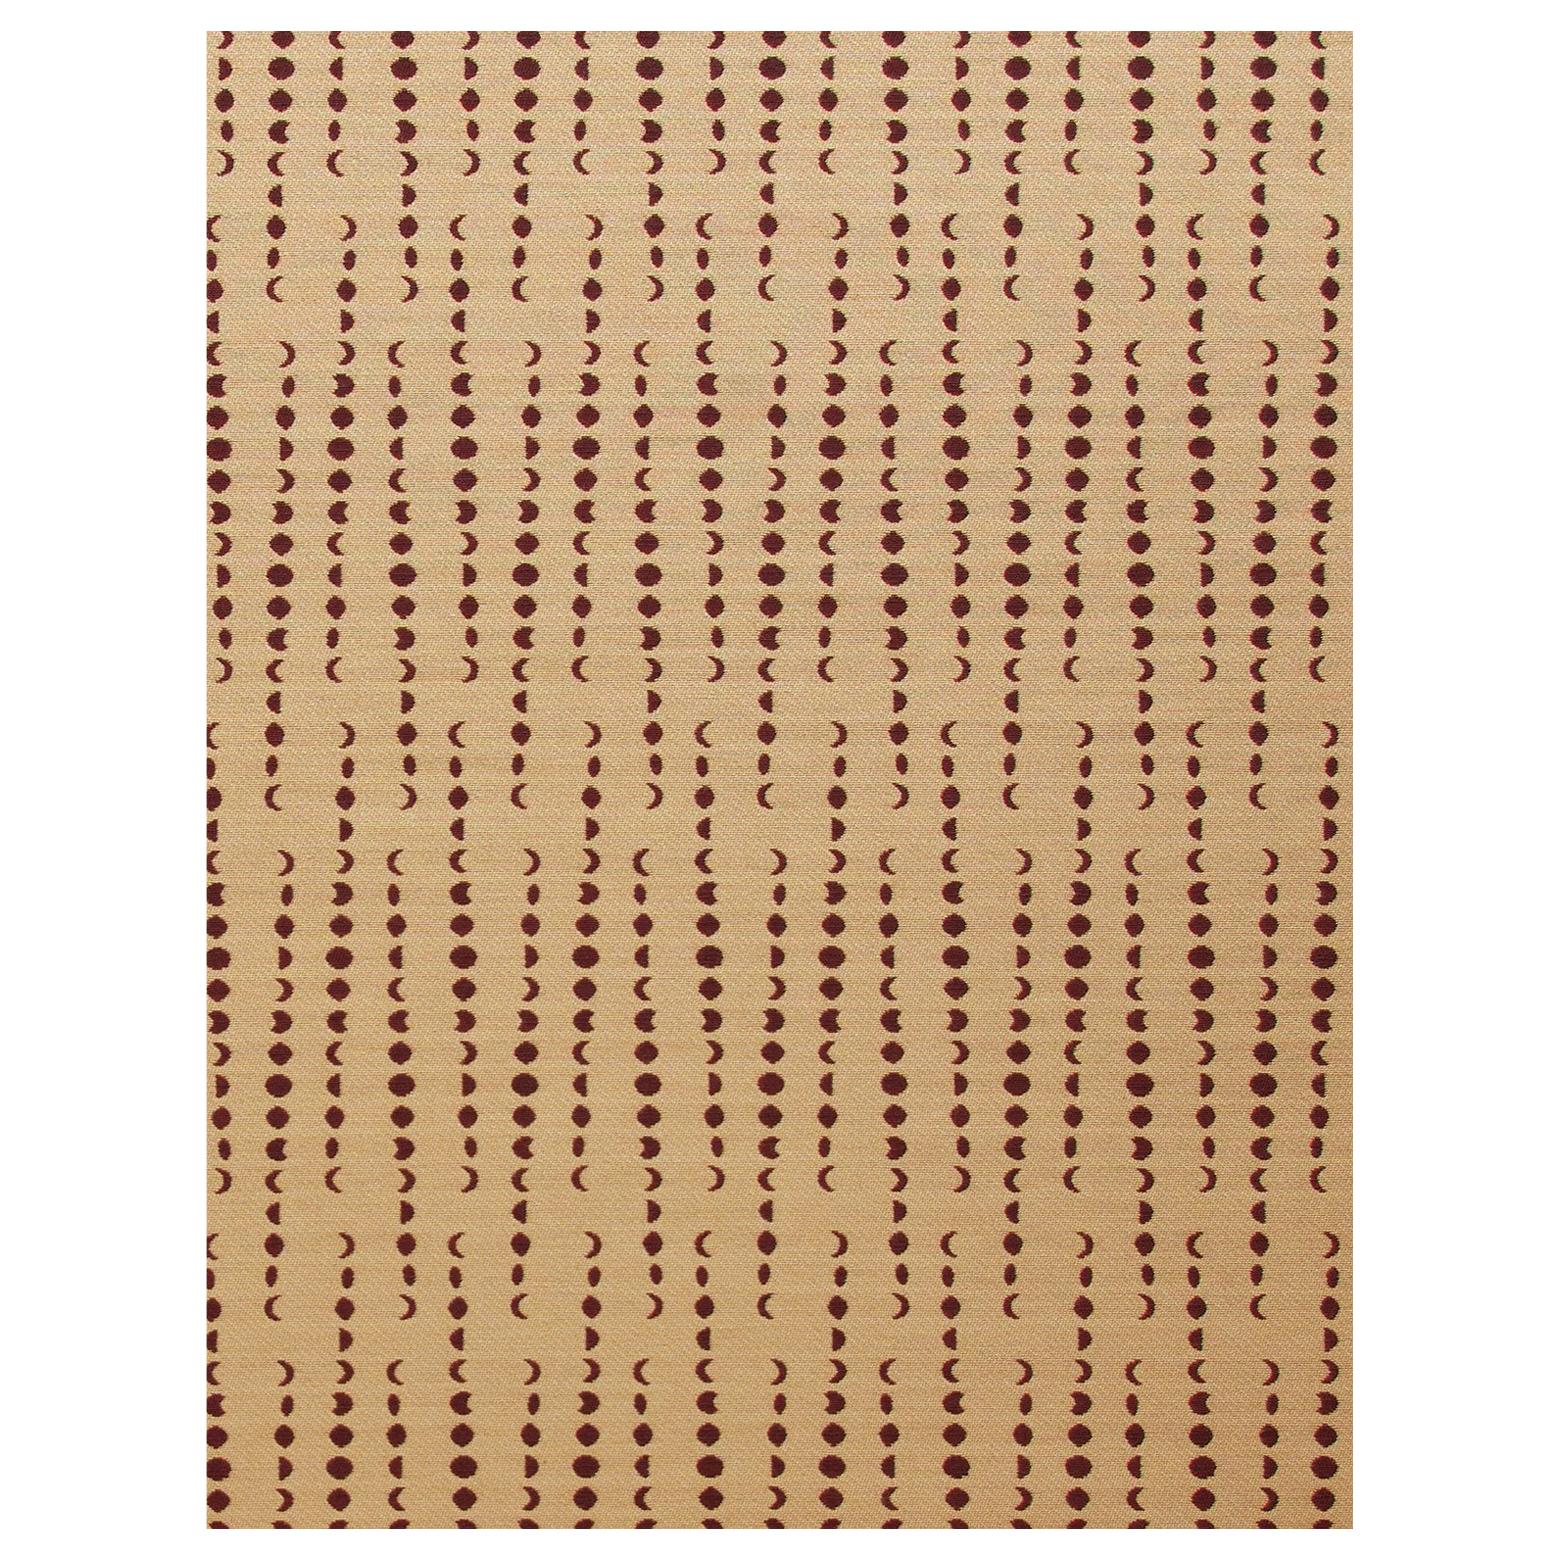 Earthlight Moon Woven Commercial Grade Fabric in Sol, Camel and Burgundy For Sale